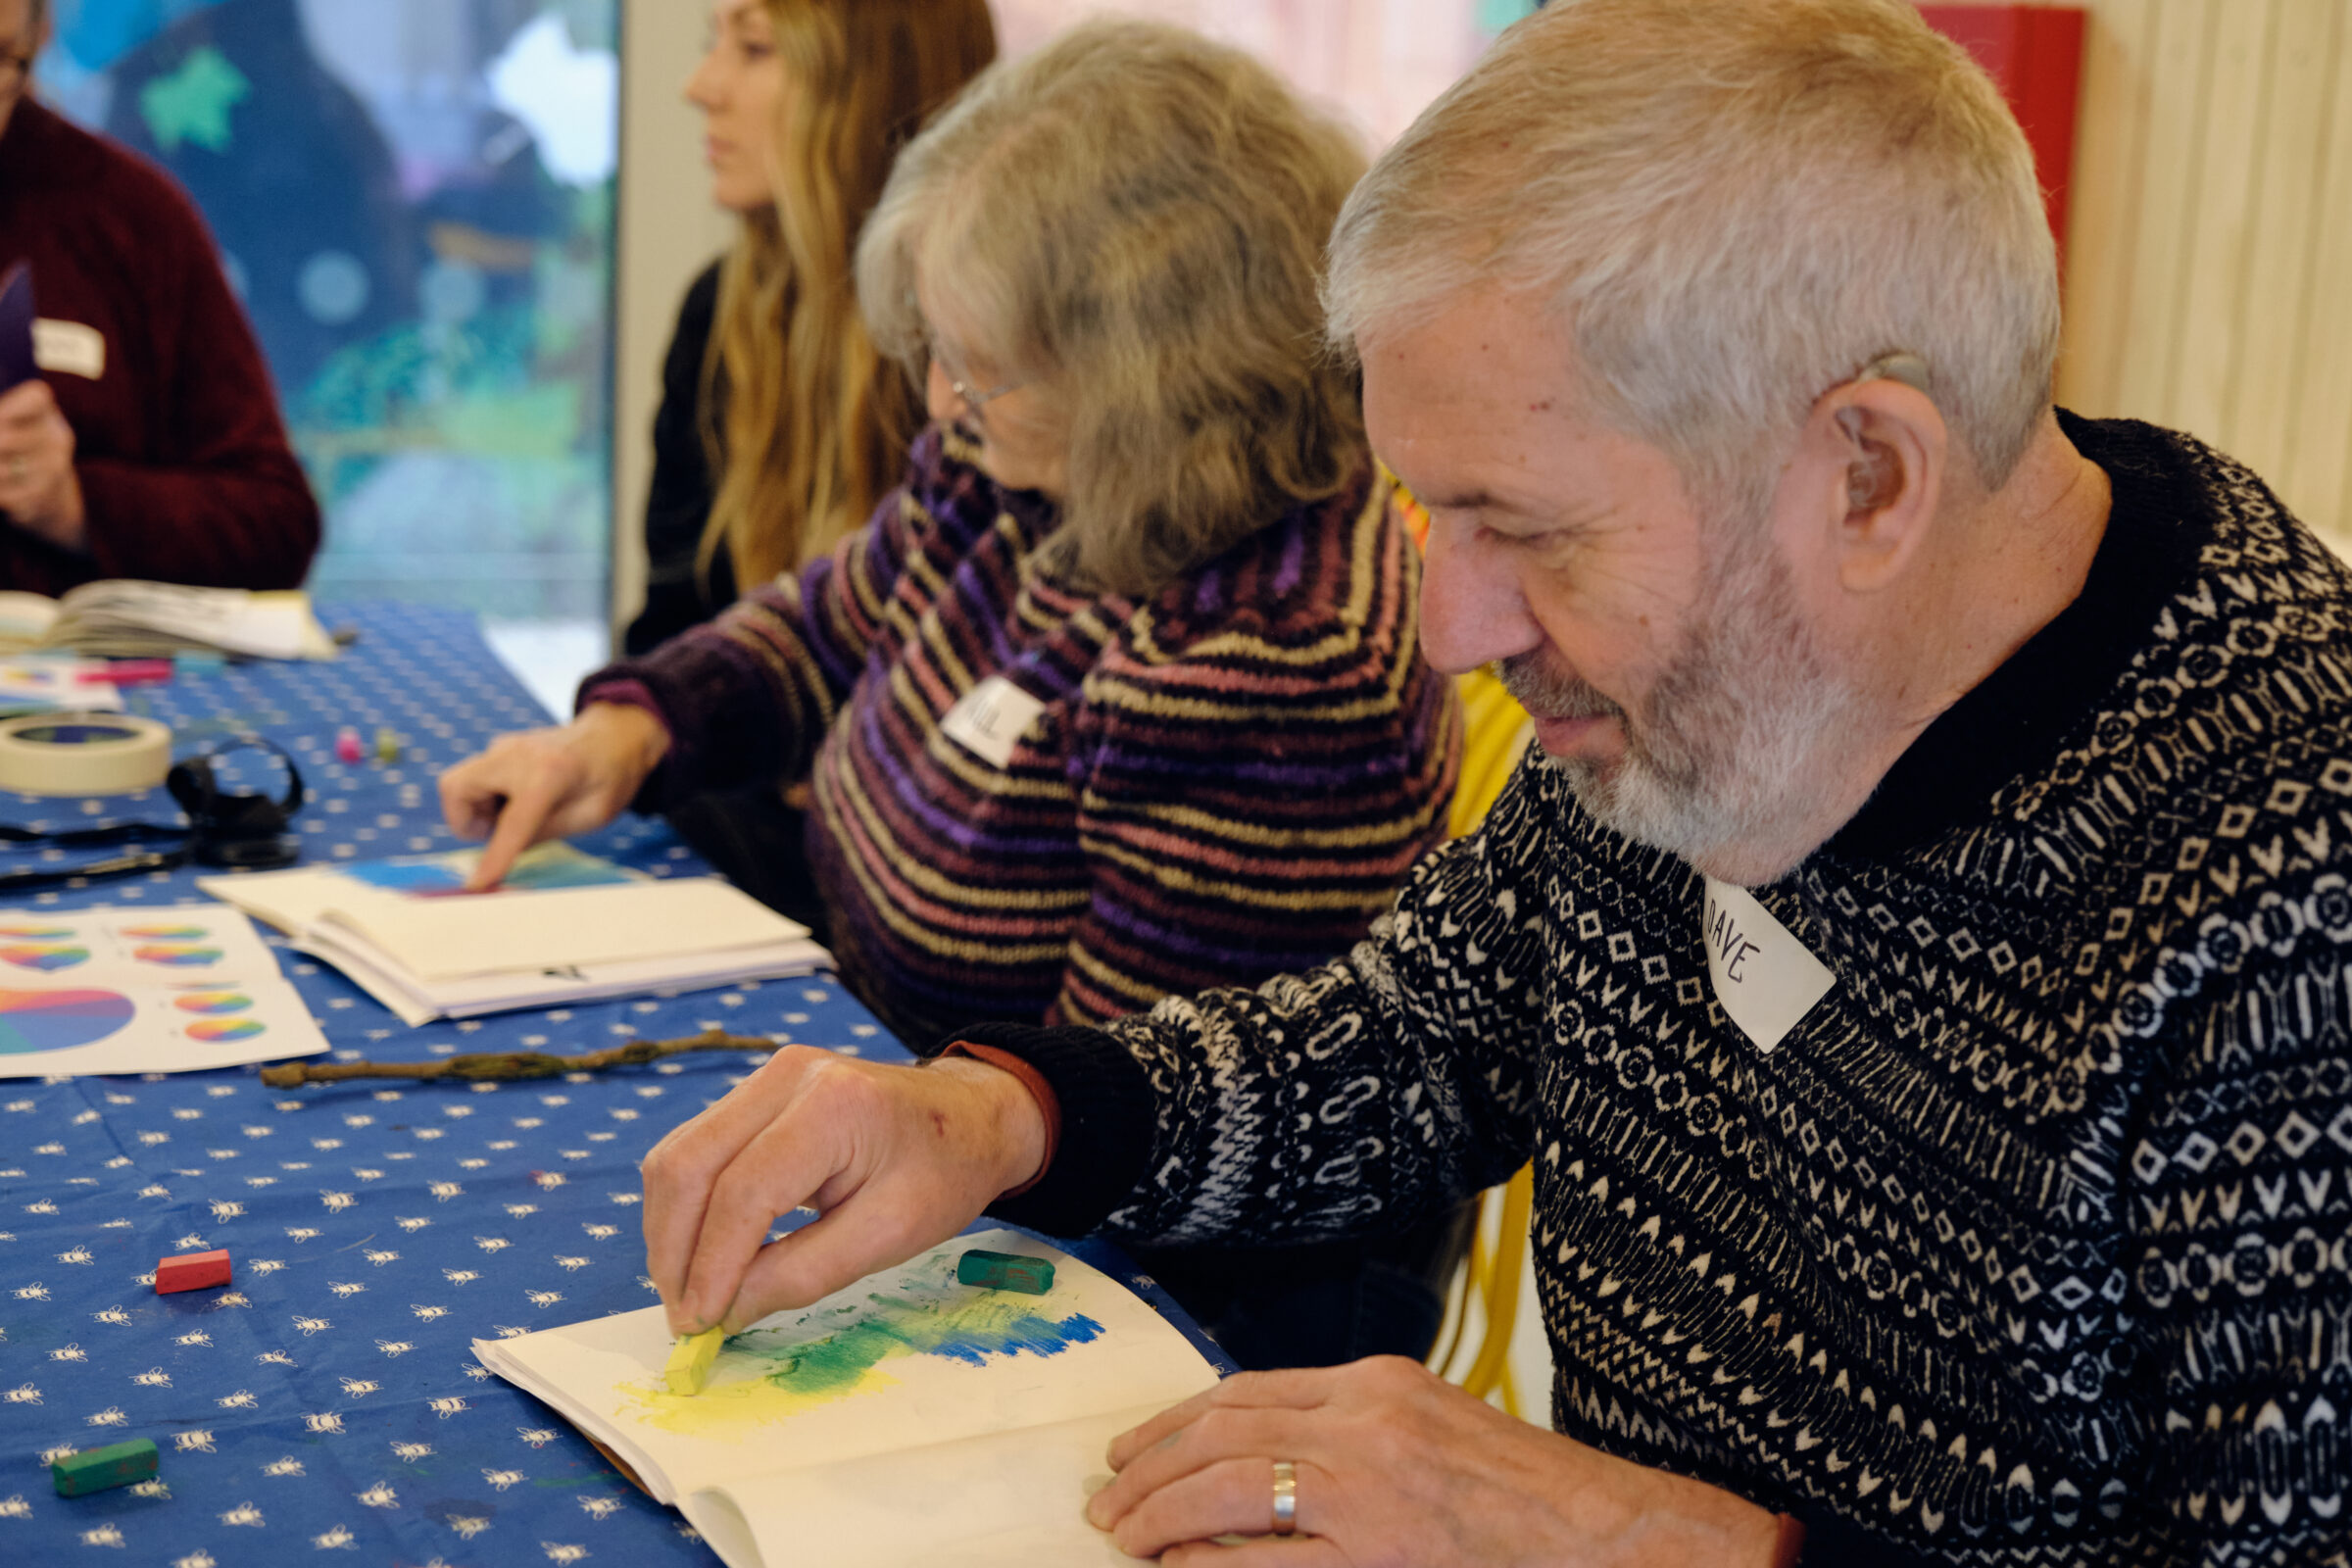 Dave is holding a yellow pastel and adding to a picture that already has blue and green and pencil lines. He is smiling gently. In the background Gill is using her finger to blend pastel colours.